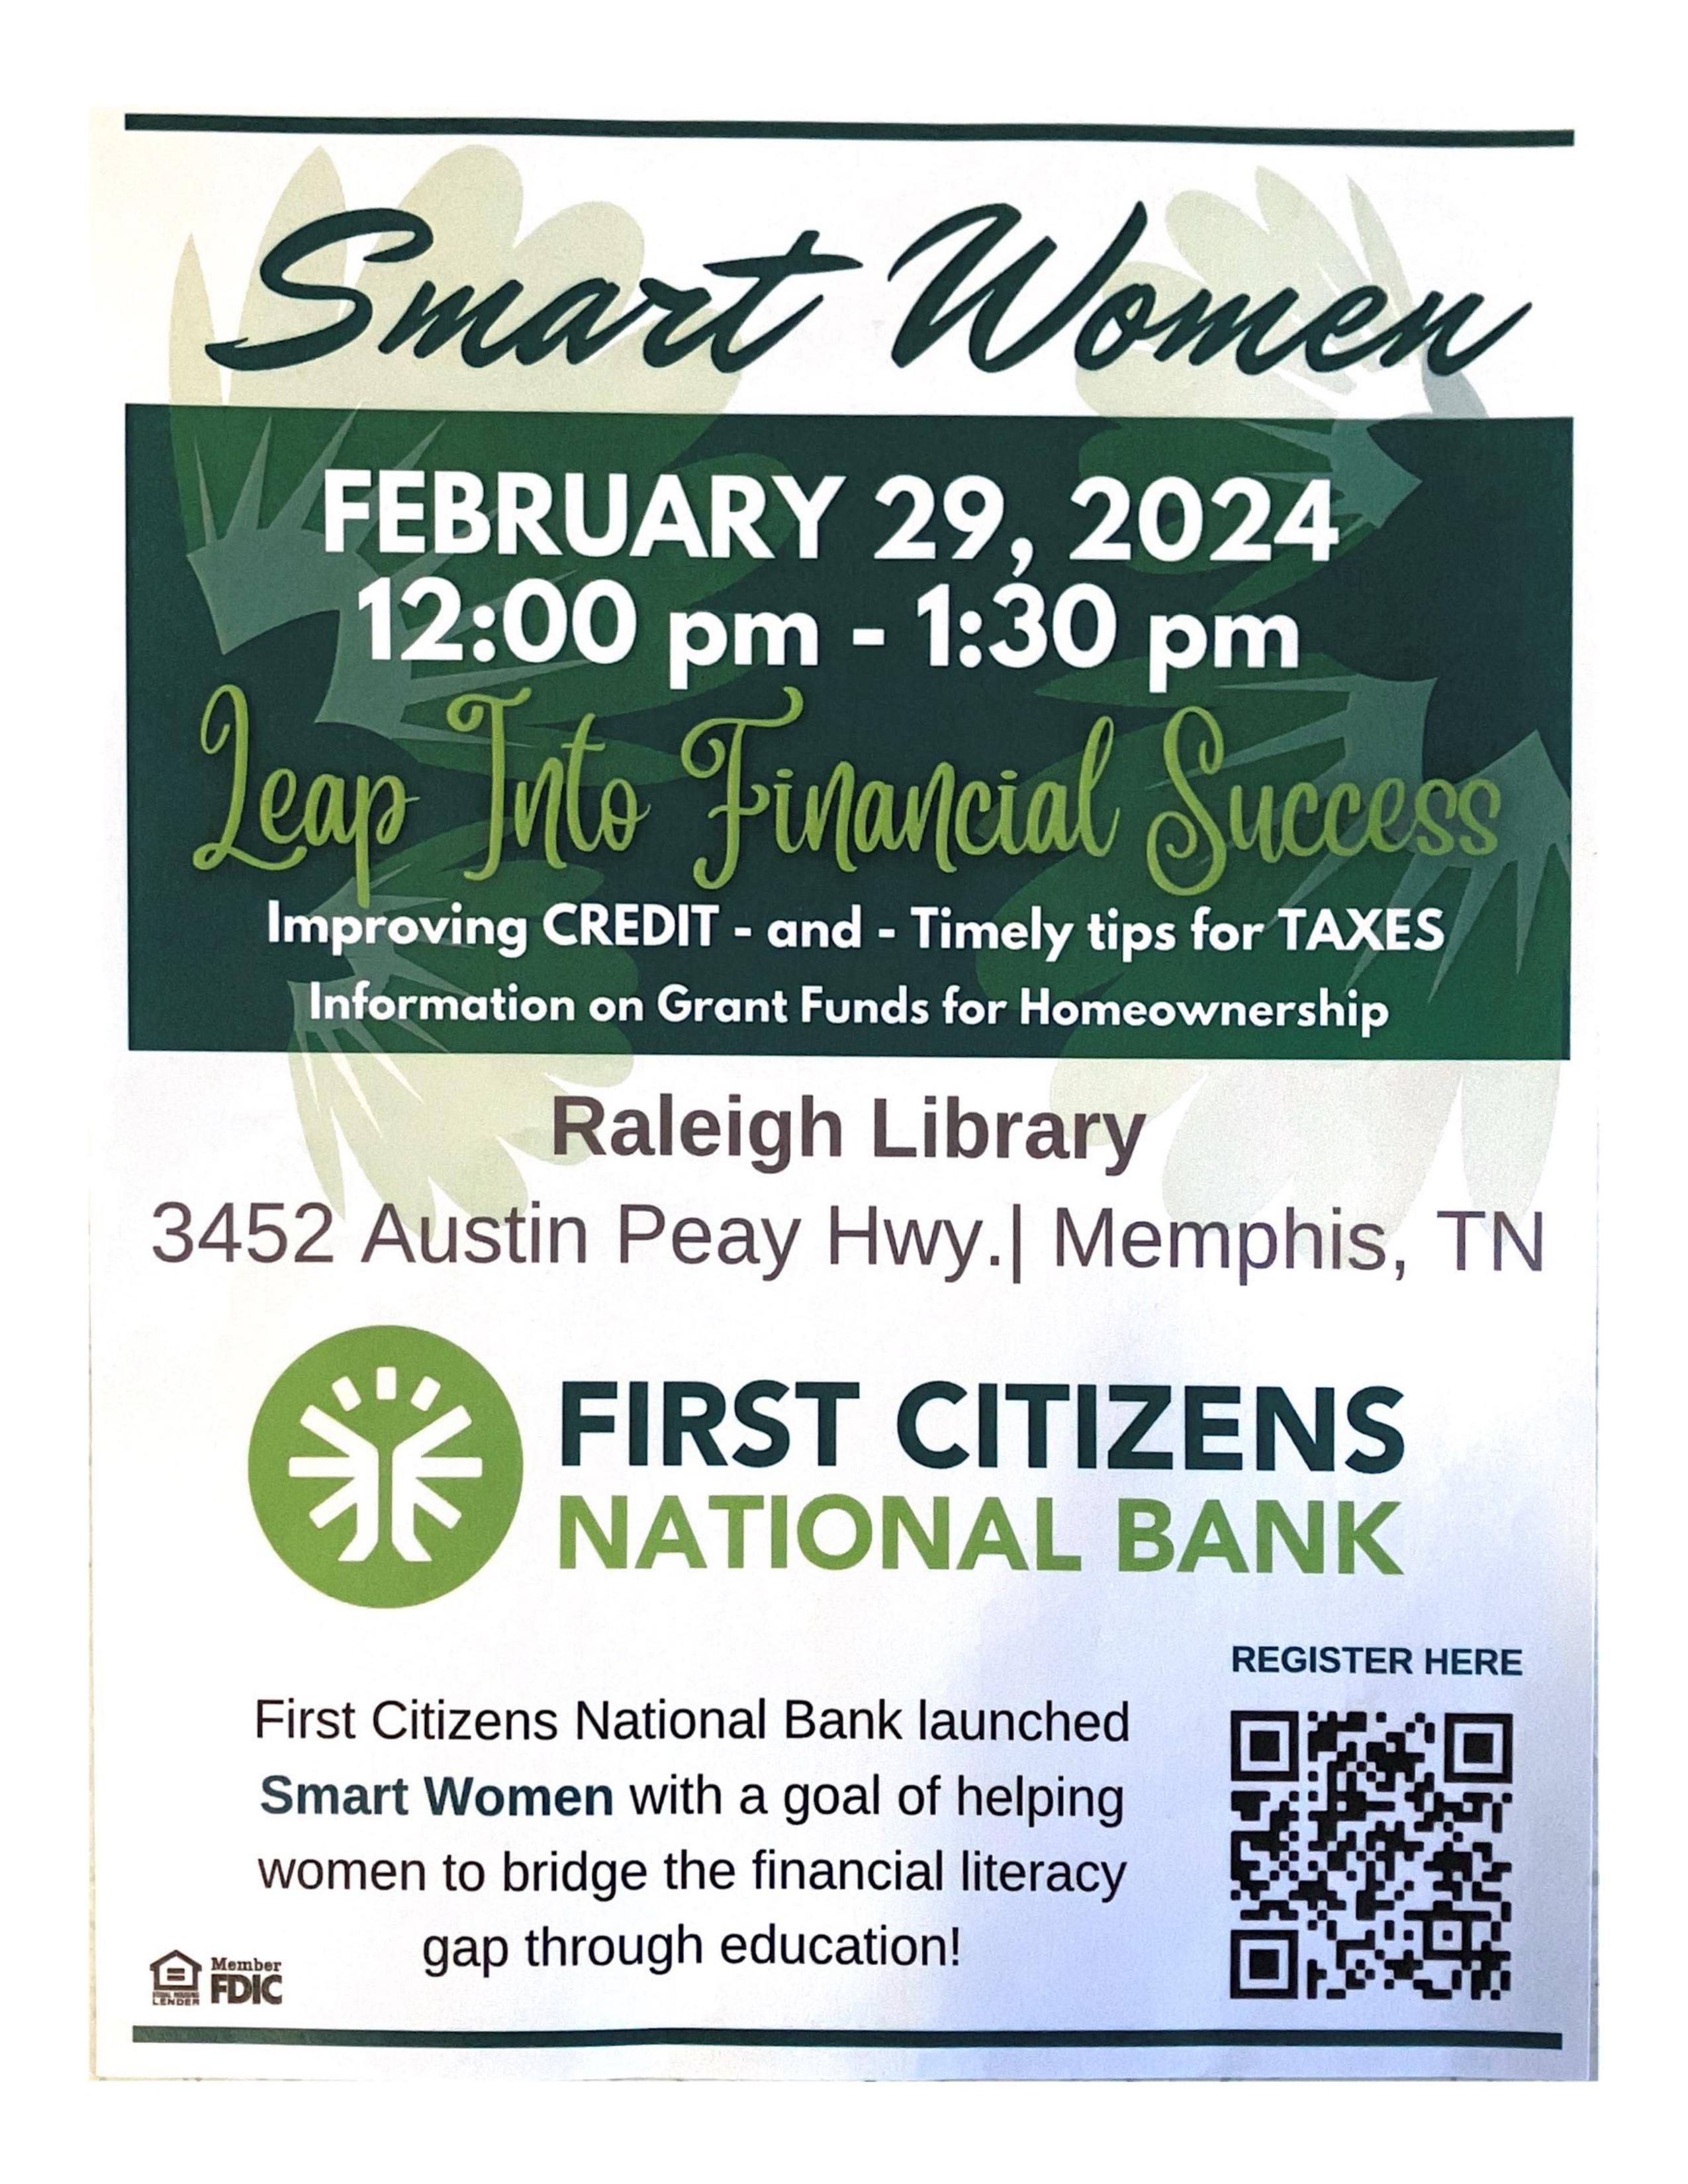 Green and White Flyer with title "Smart Women" displaying information about program